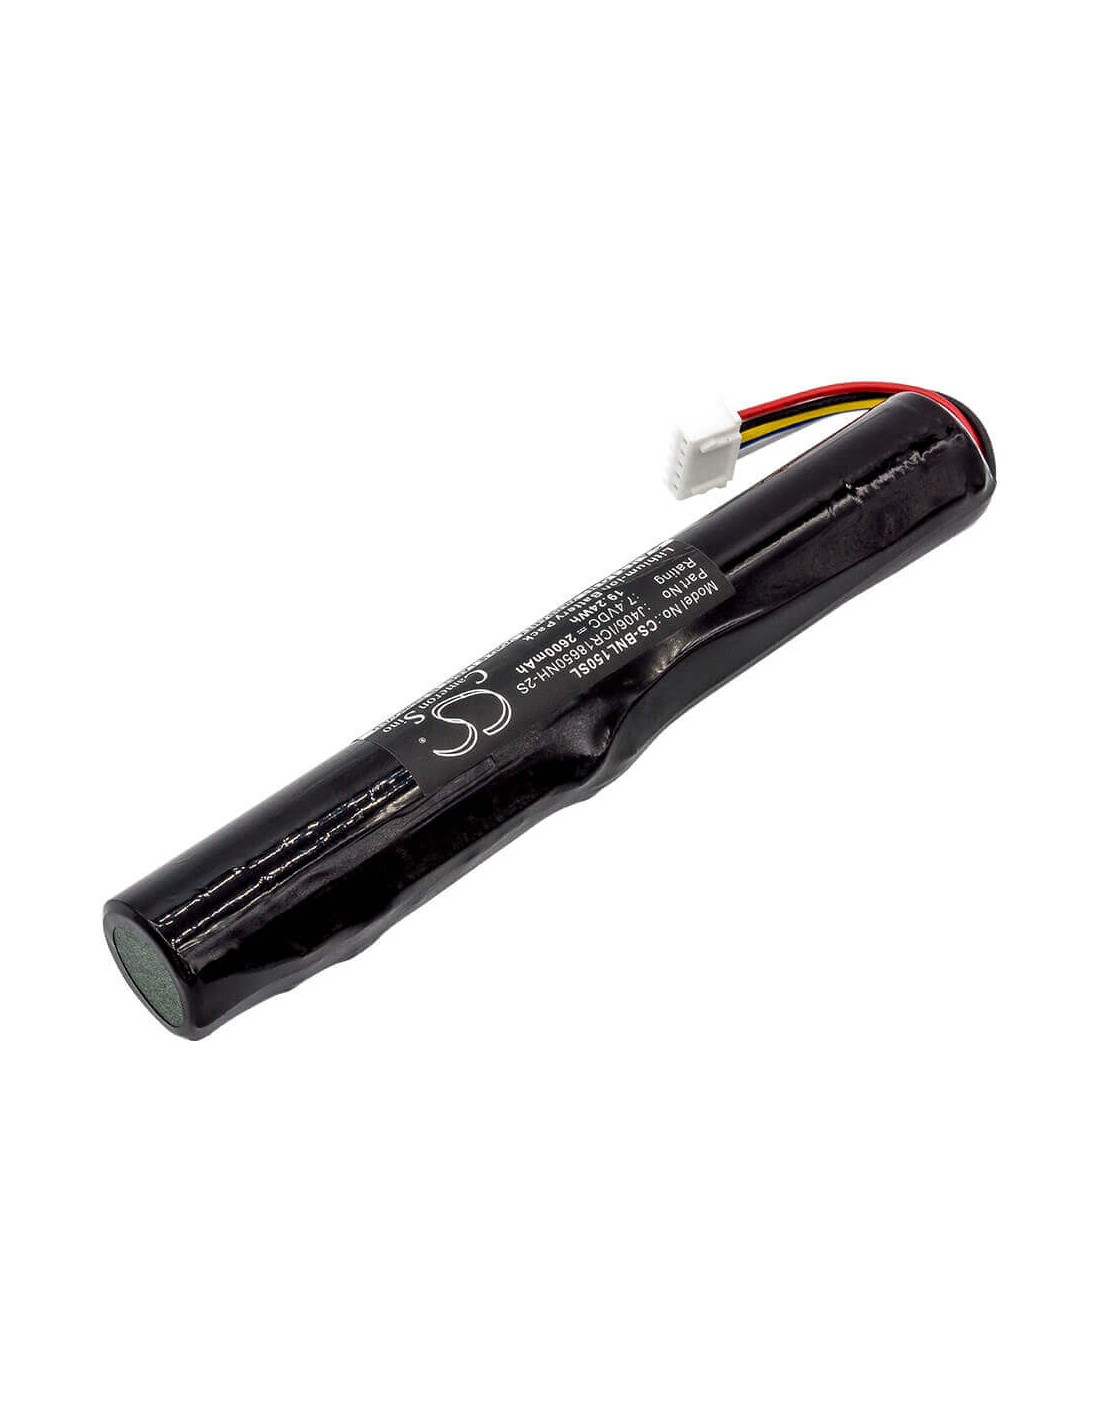 Battery for Bang & Olufsen, Beolit 15, Beolit 17, Beoplay A2, Beopl 7.4V, 2600mAh - 19.24Wh